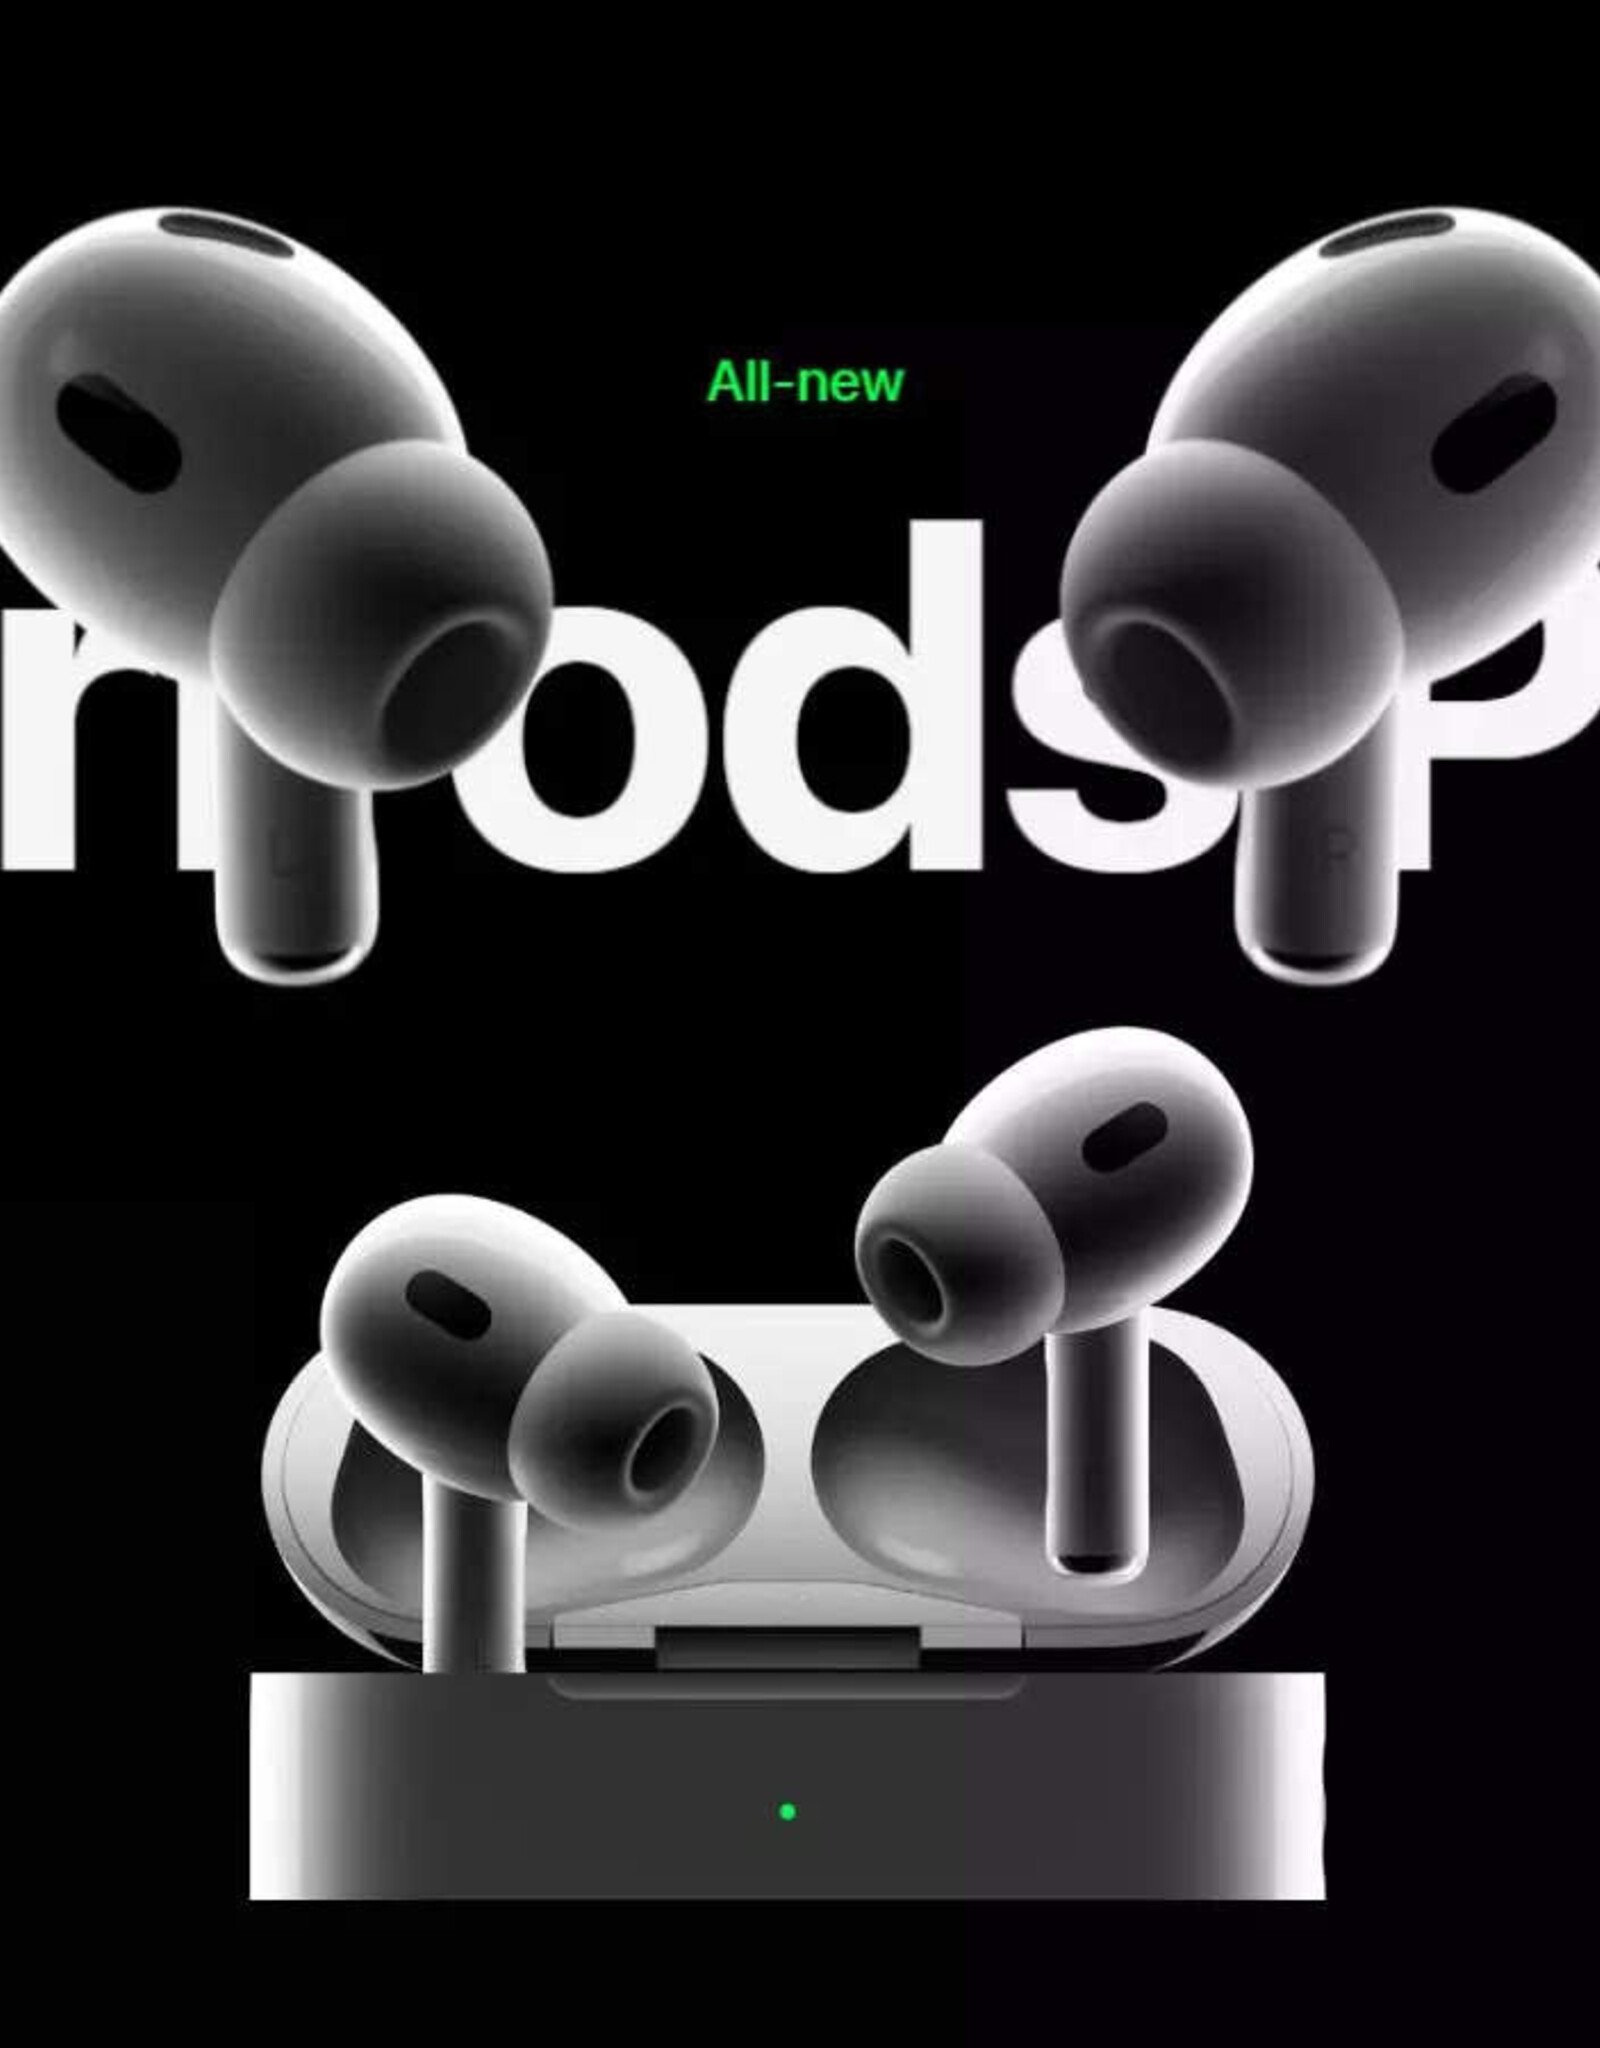 Apple Apple AirPods Pro 2 (2nd generation)